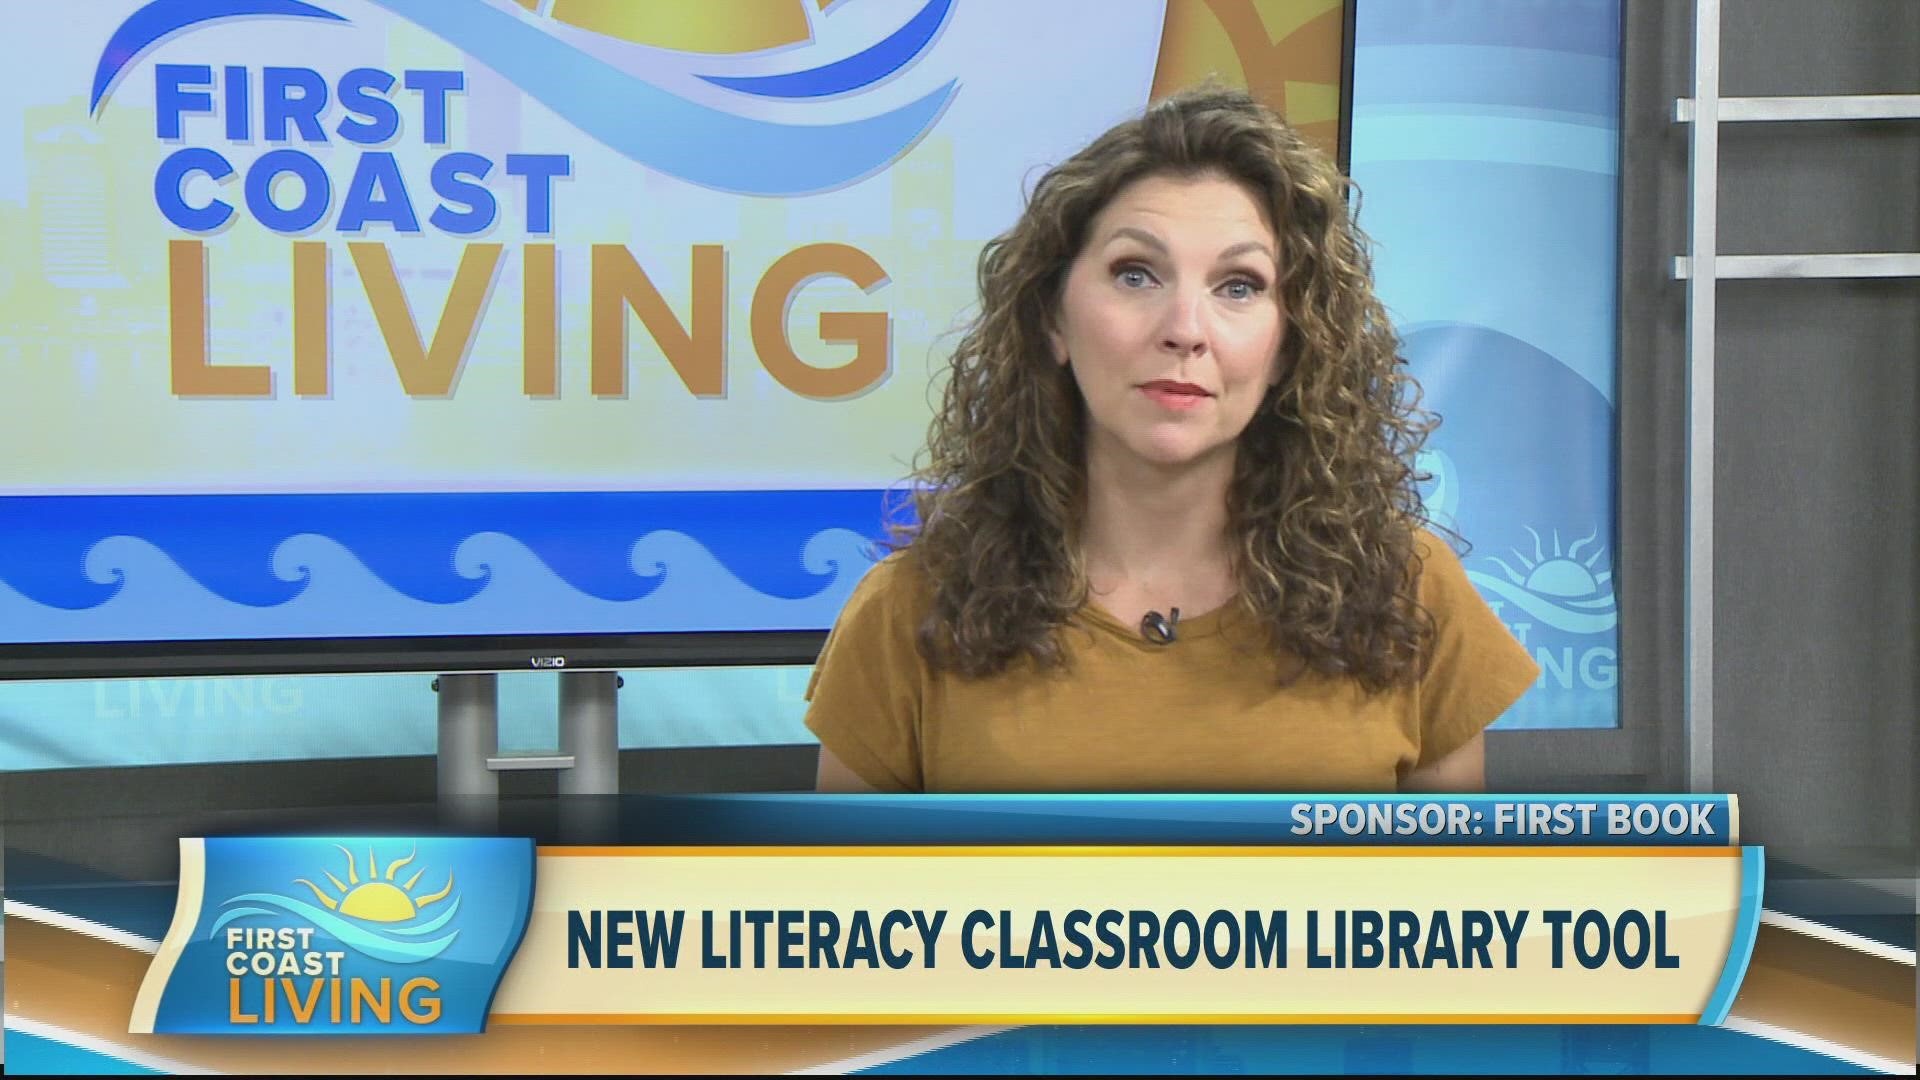 Literacy expert, Dr. Susan B. Neuman and Julianne Appleton, First Book Director of Research & Insights discuss the importance of having physical books in classrooms.